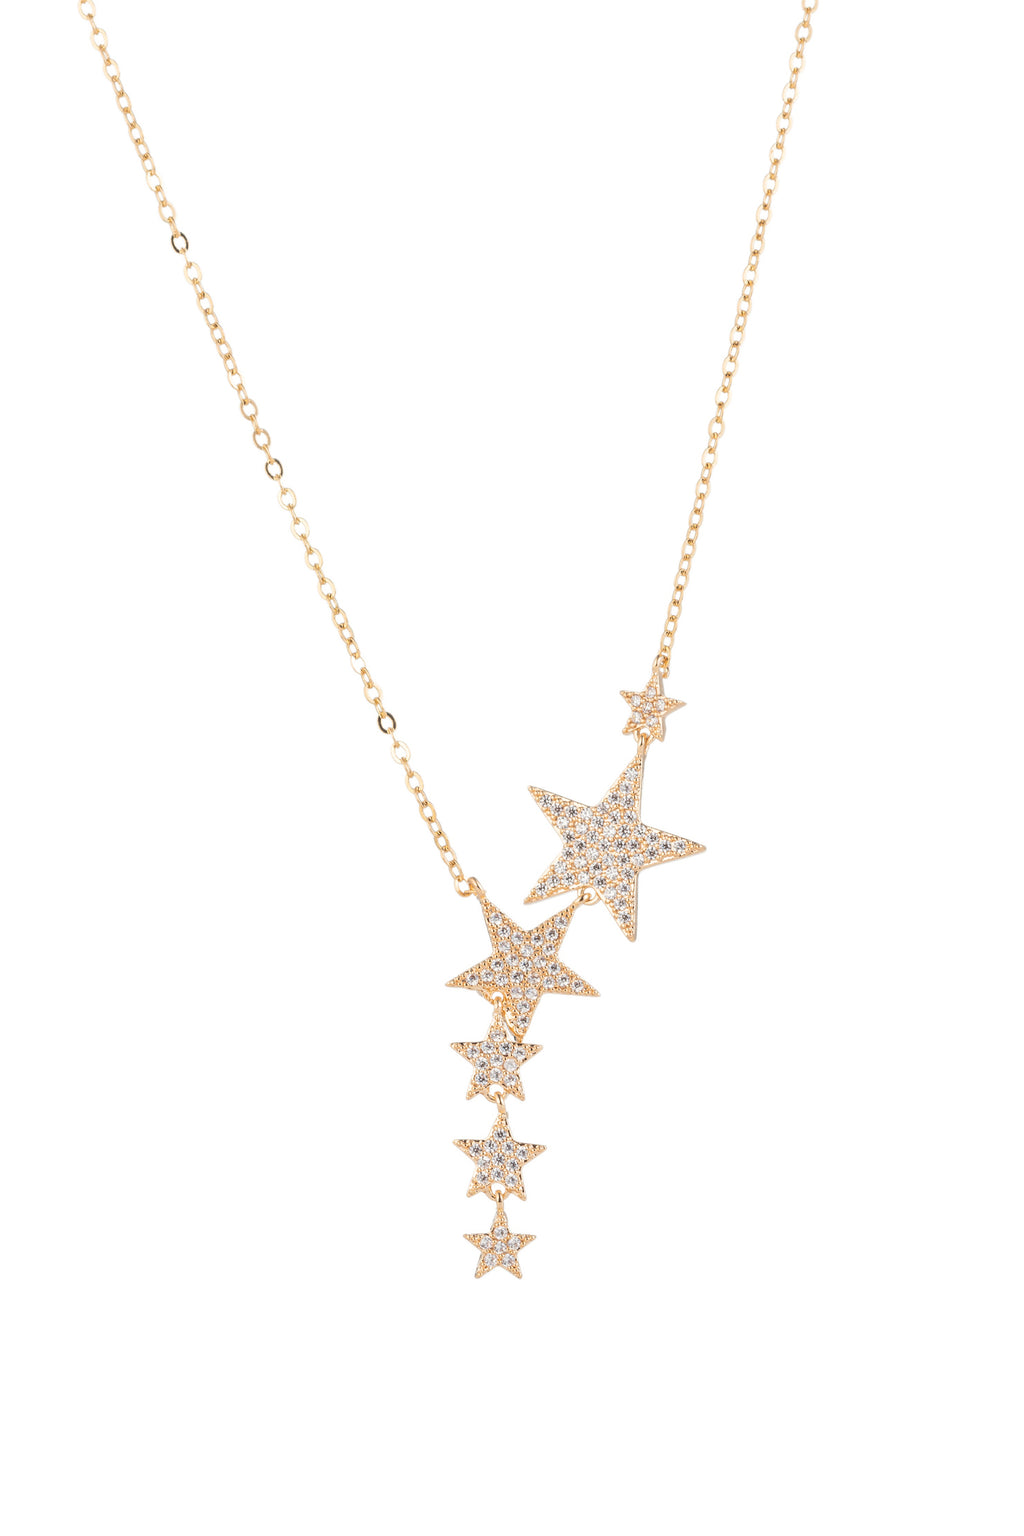 Sterling silver 14k gold plated shooting star pendant with CZ crystals on a gold chain.